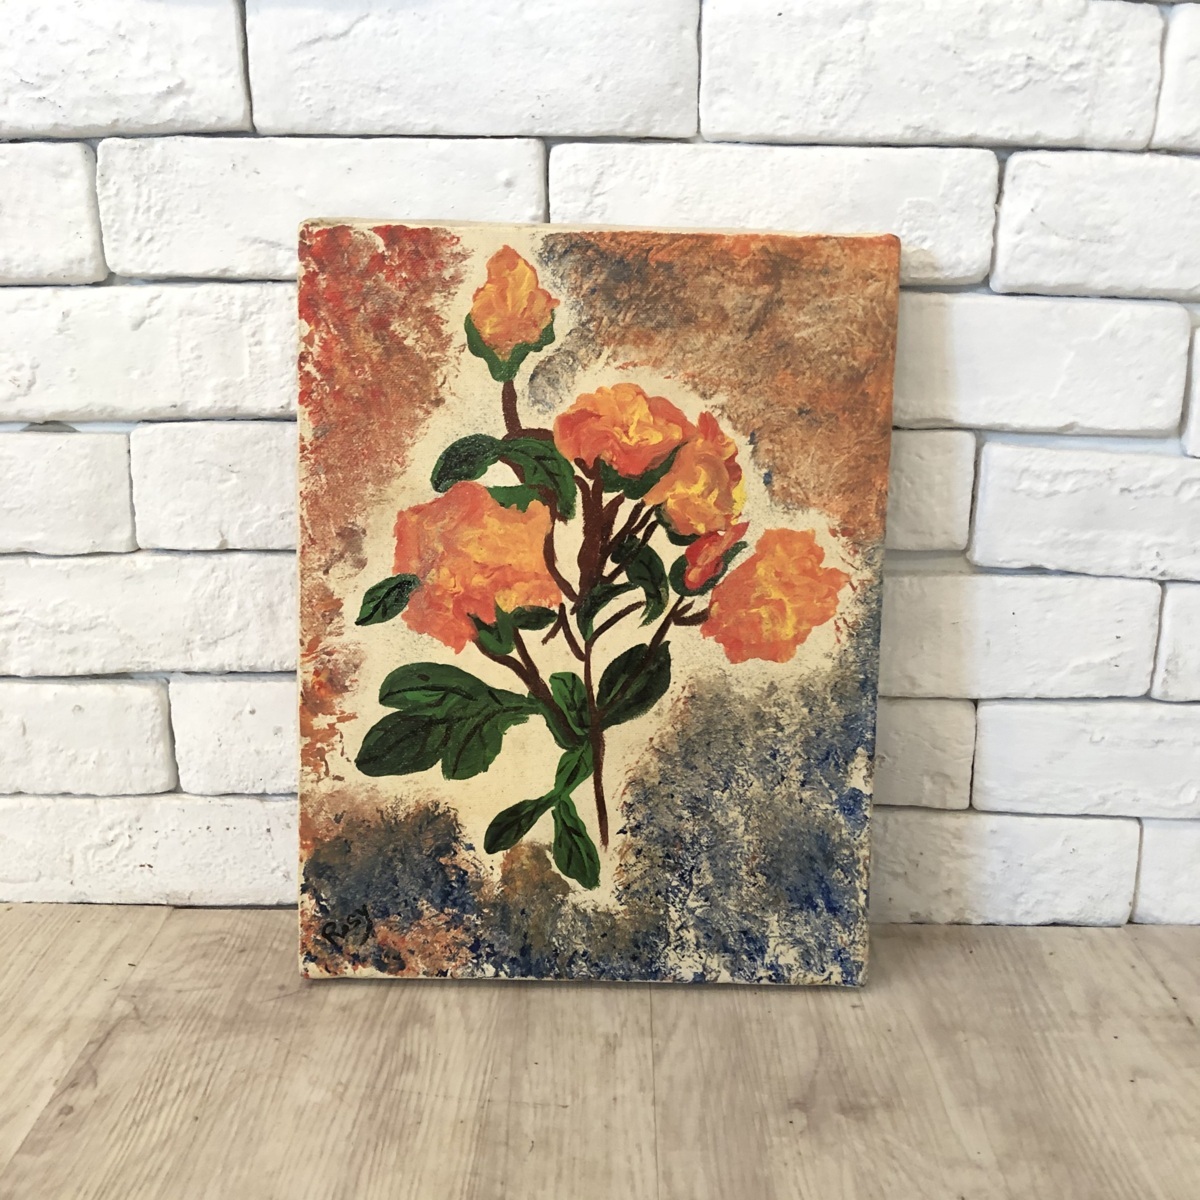 2709 Purchased in Europe Antique Painting Oil Painting Panel Modern Interior Botanical Painting Rose Canvas Height 35cm Width 27cm Depth 2cm bbb, painting, oil painting, Nature, Landscape painting